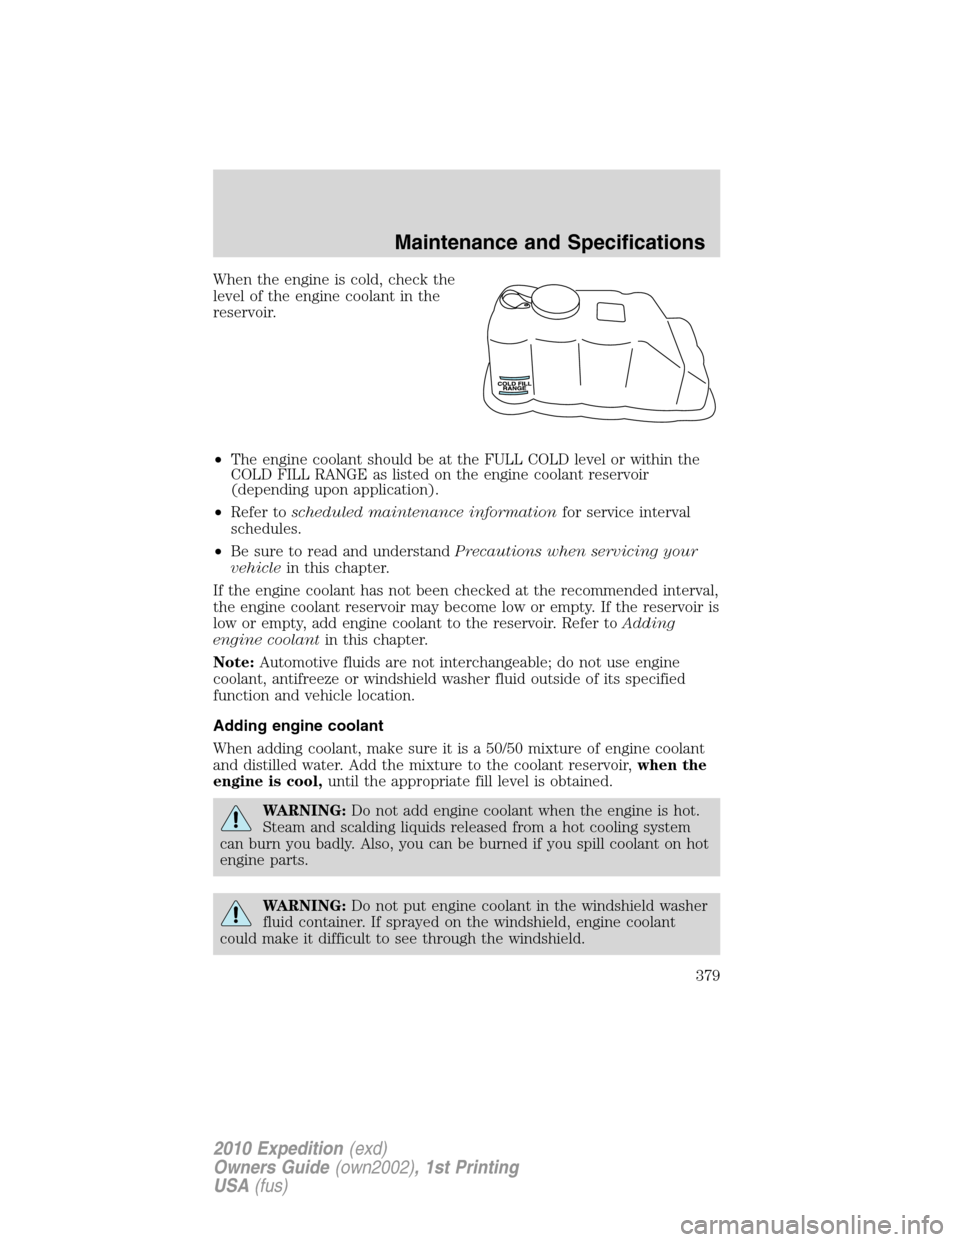 FORD EXPEDITION 2010 3.G Service Manual When the engine is cold, check the
level of the engine coolant in the
reservoir.
•The engine coolant should be at the FULL COLD level or within the
COLD FILL RANGE as listed on the engine coolant re